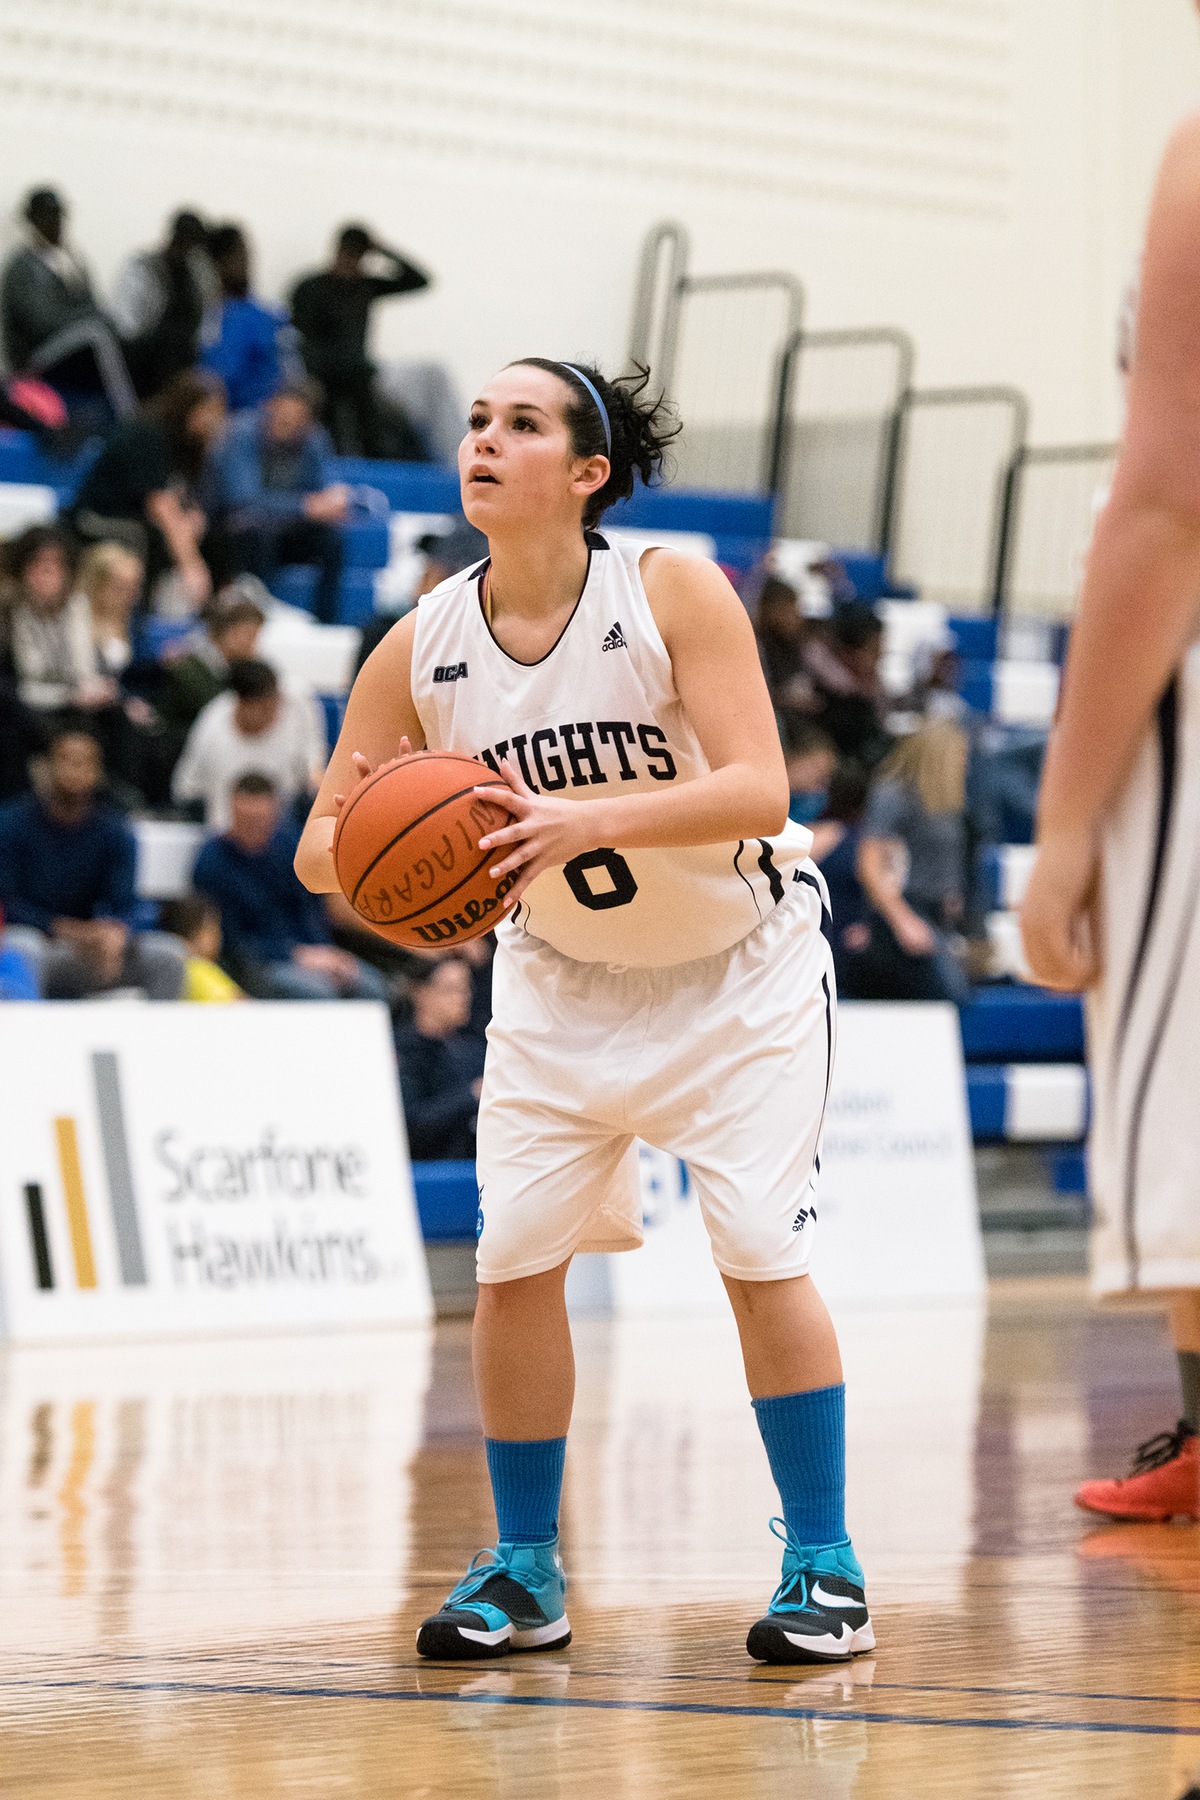 RECAP: Knights fall to Mountaineers in season opener; Look to rebound against U of T Mississauga